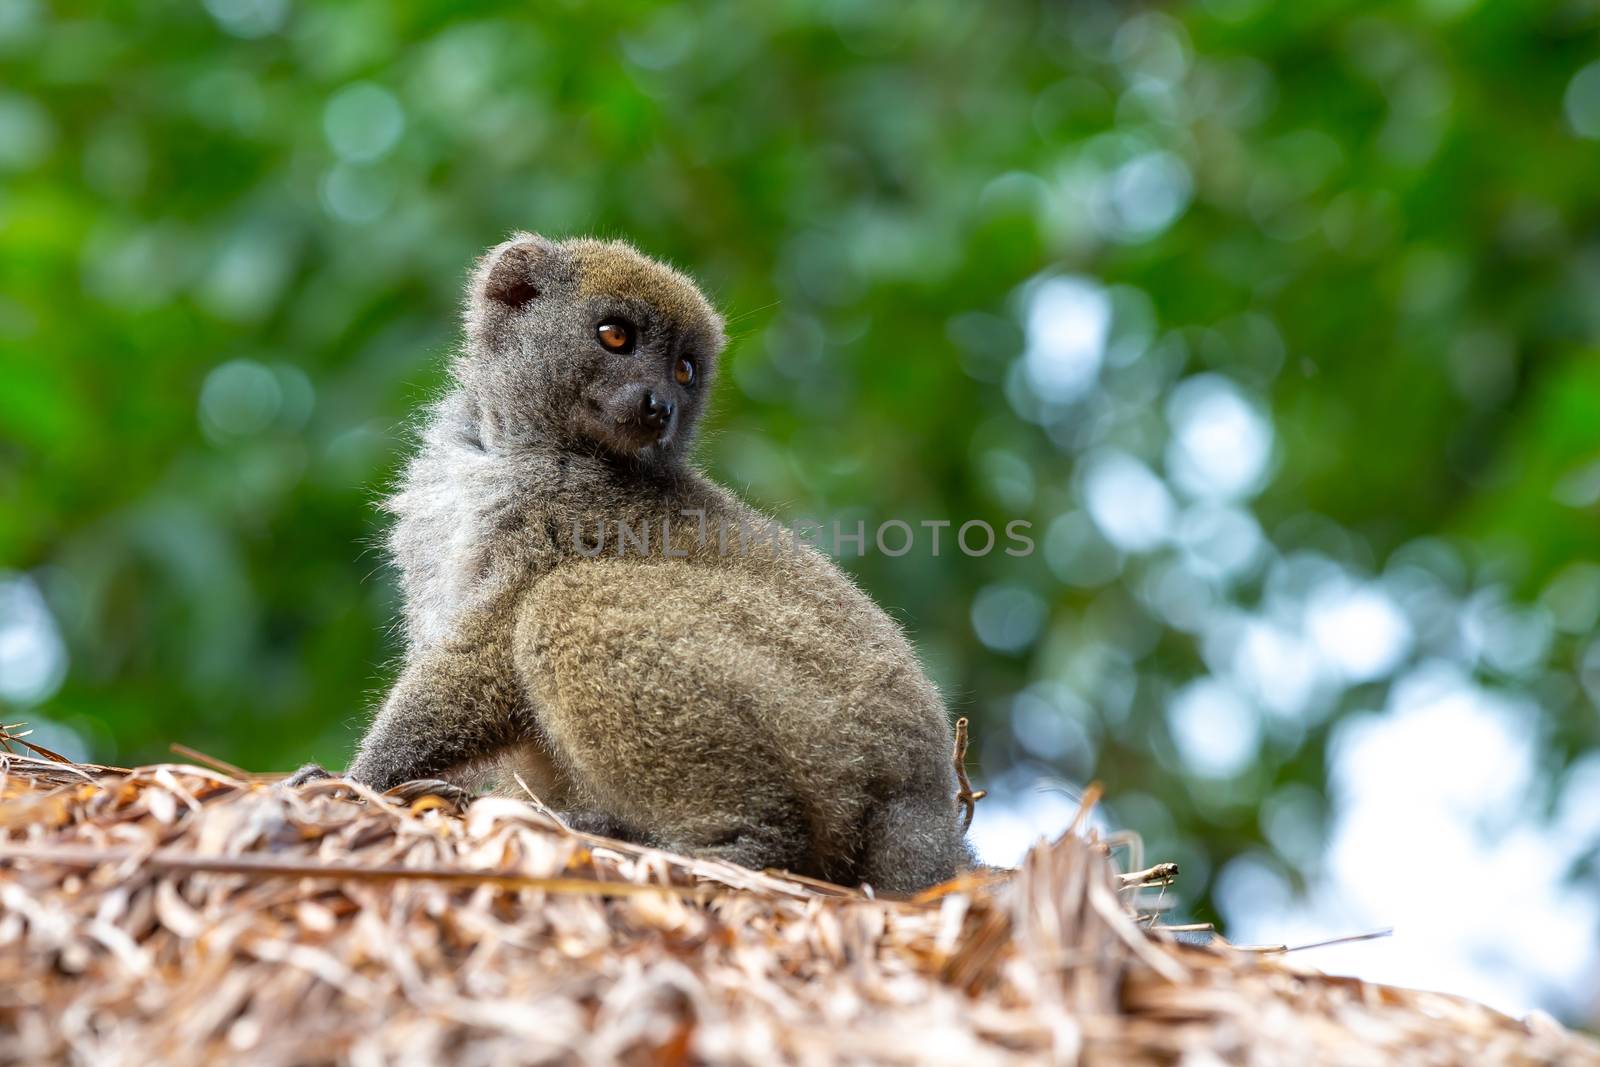 Portrait of a bamboo lemur in its natural environment by 25ehaag6